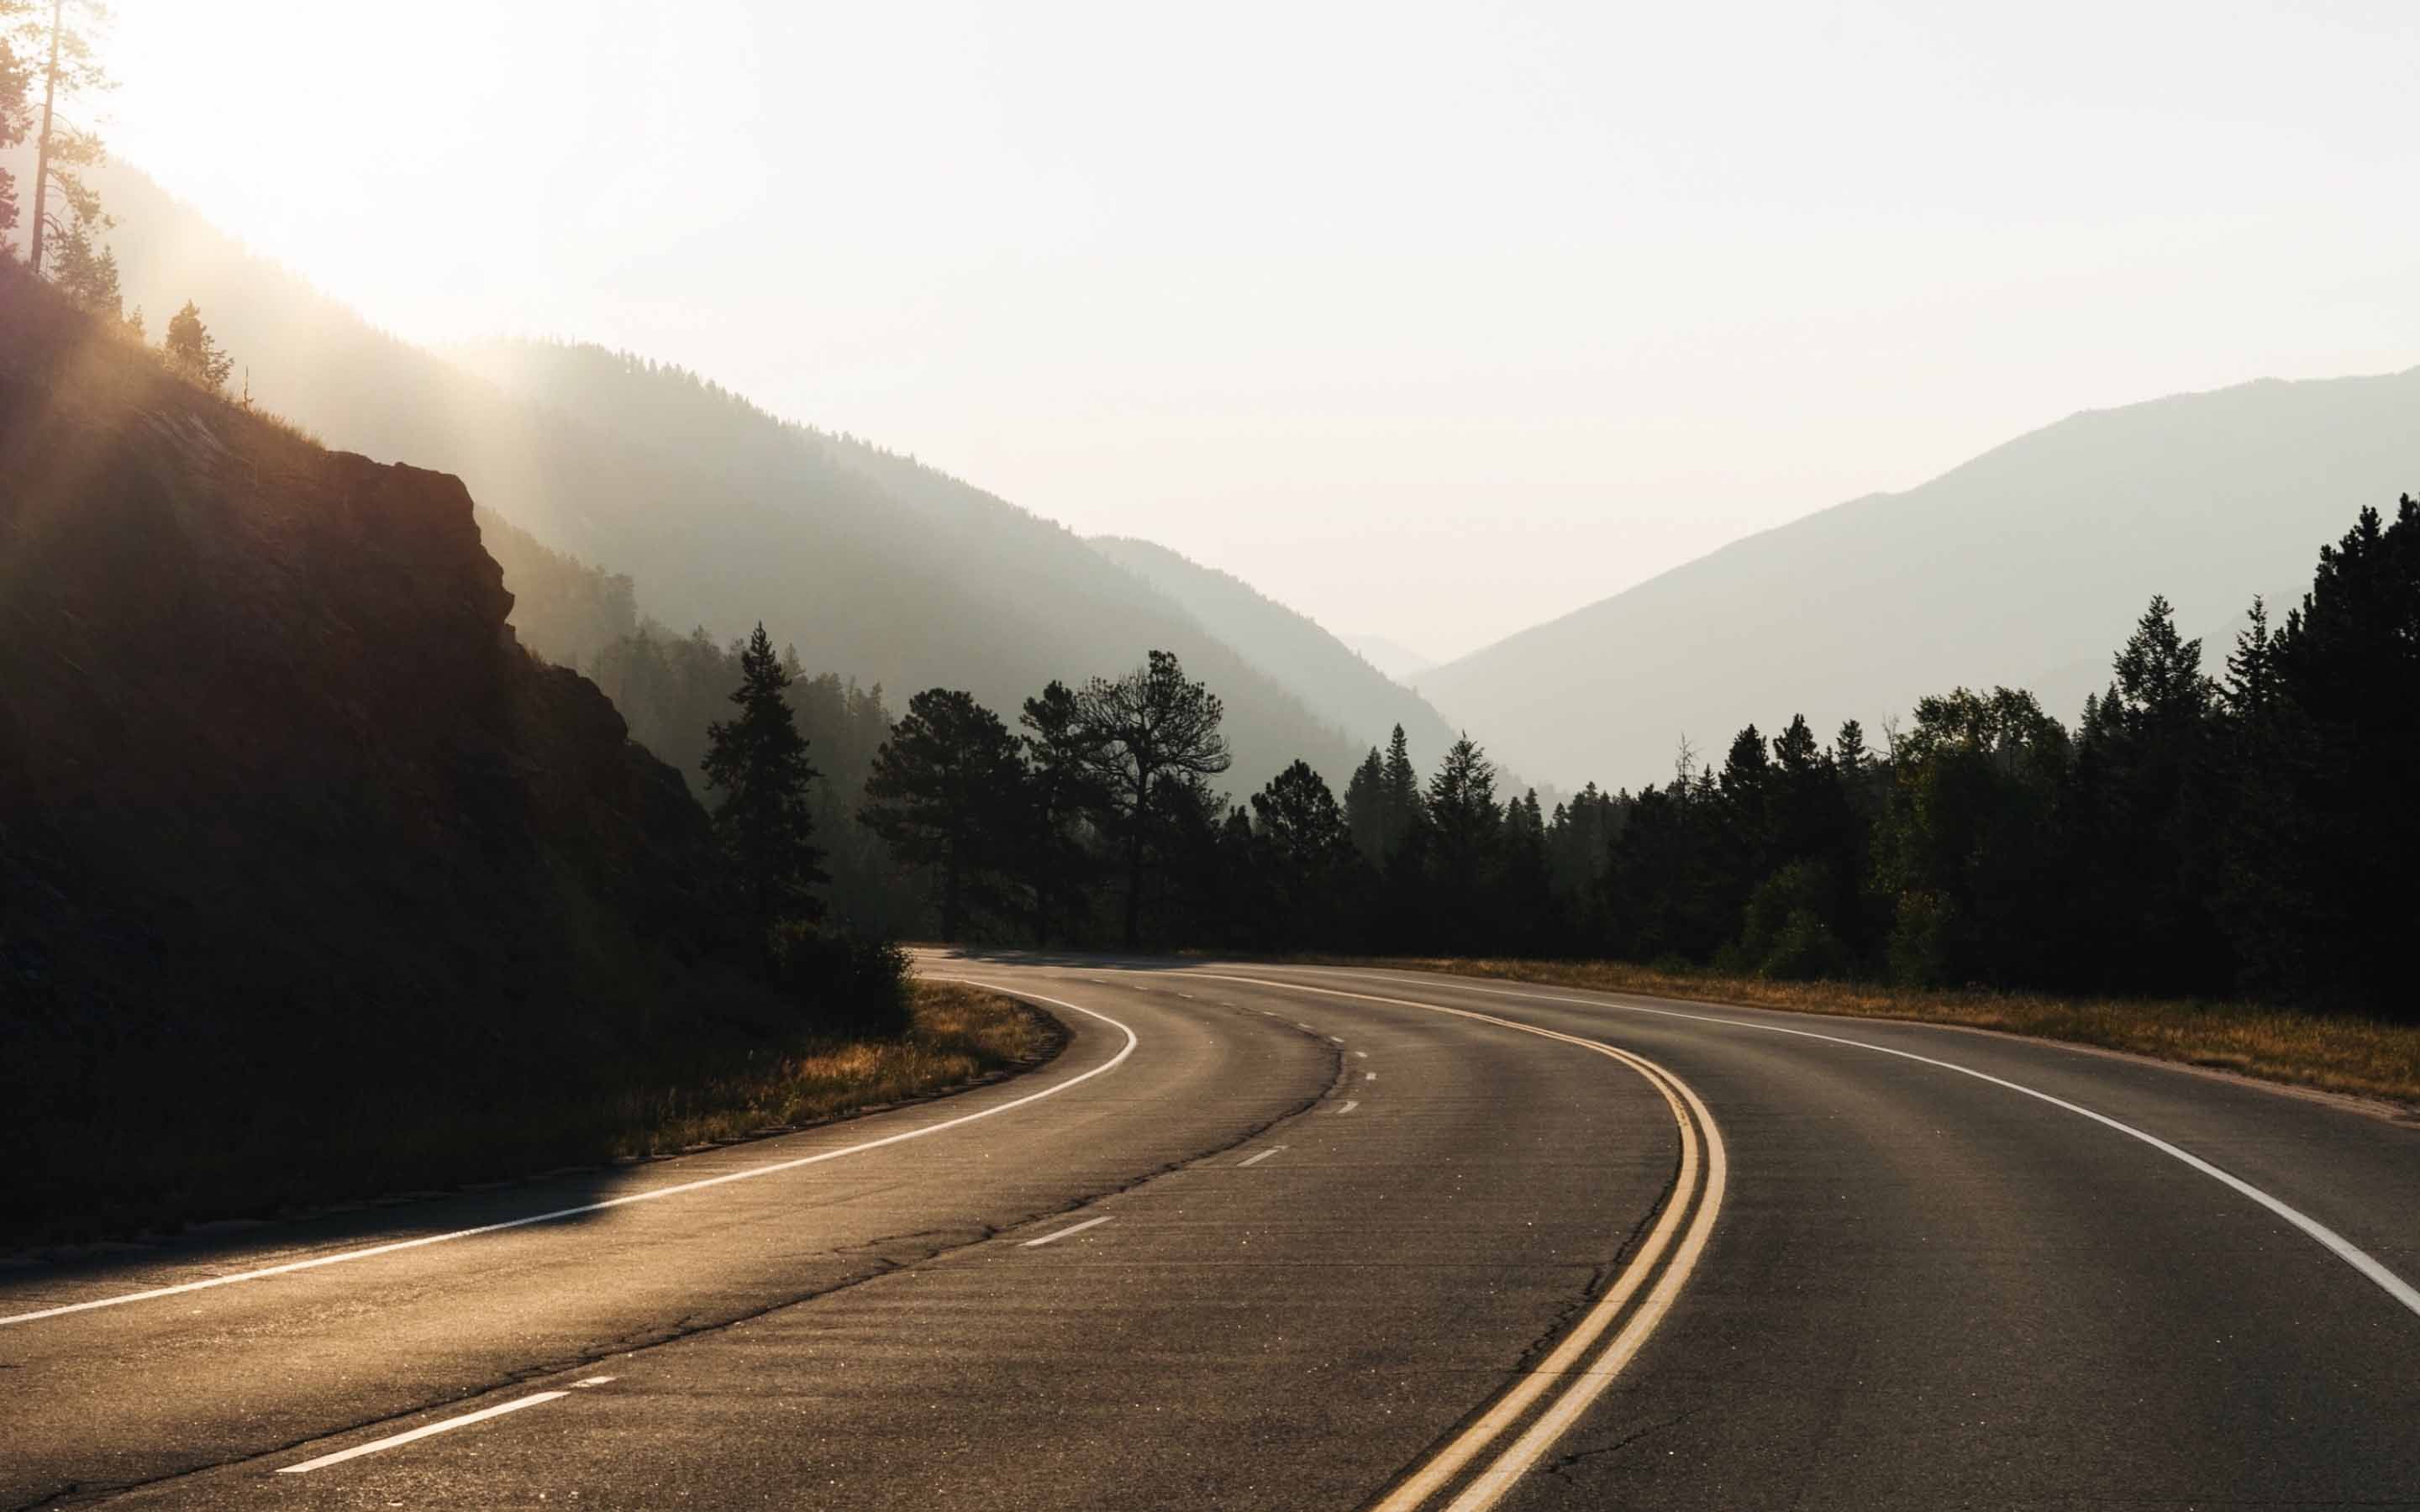 A winding, open road at sunrise.